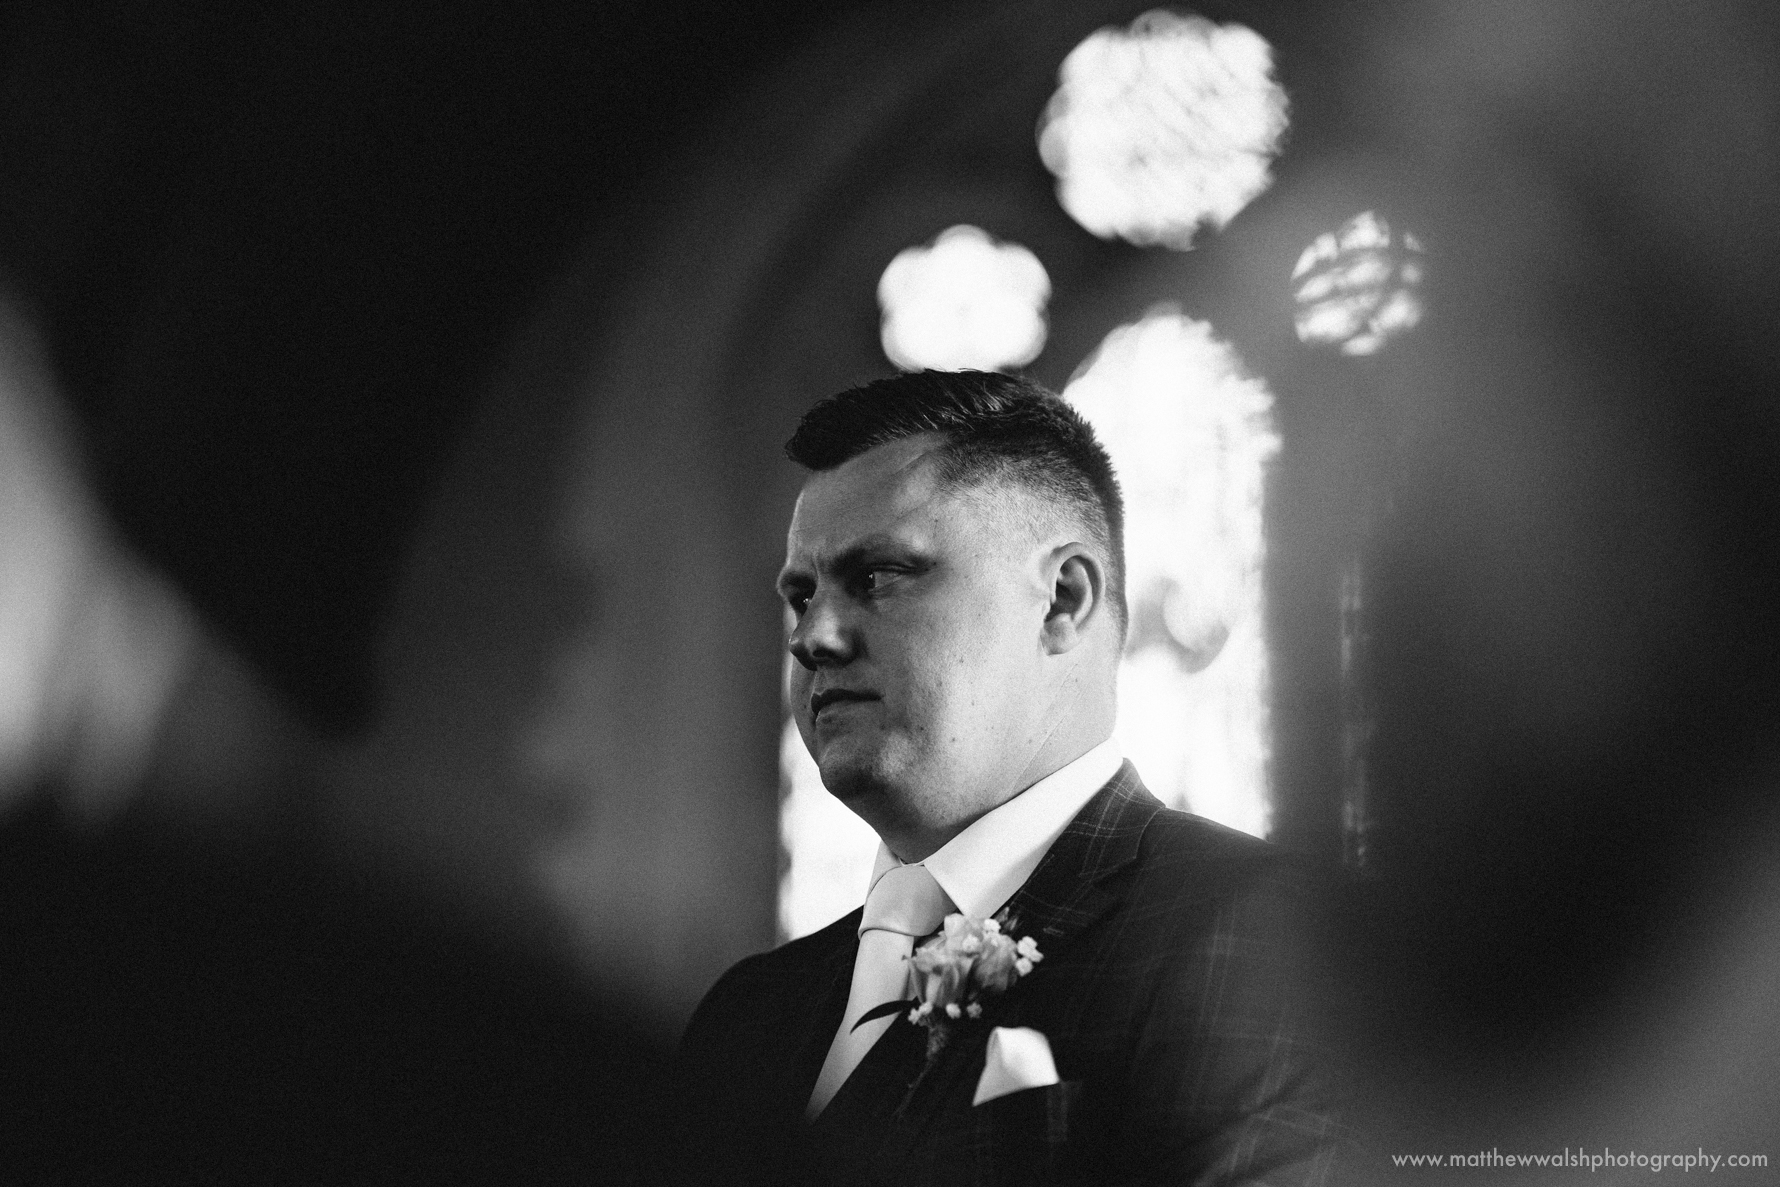 The groom at the church awaiting his bride, looking a little nervous